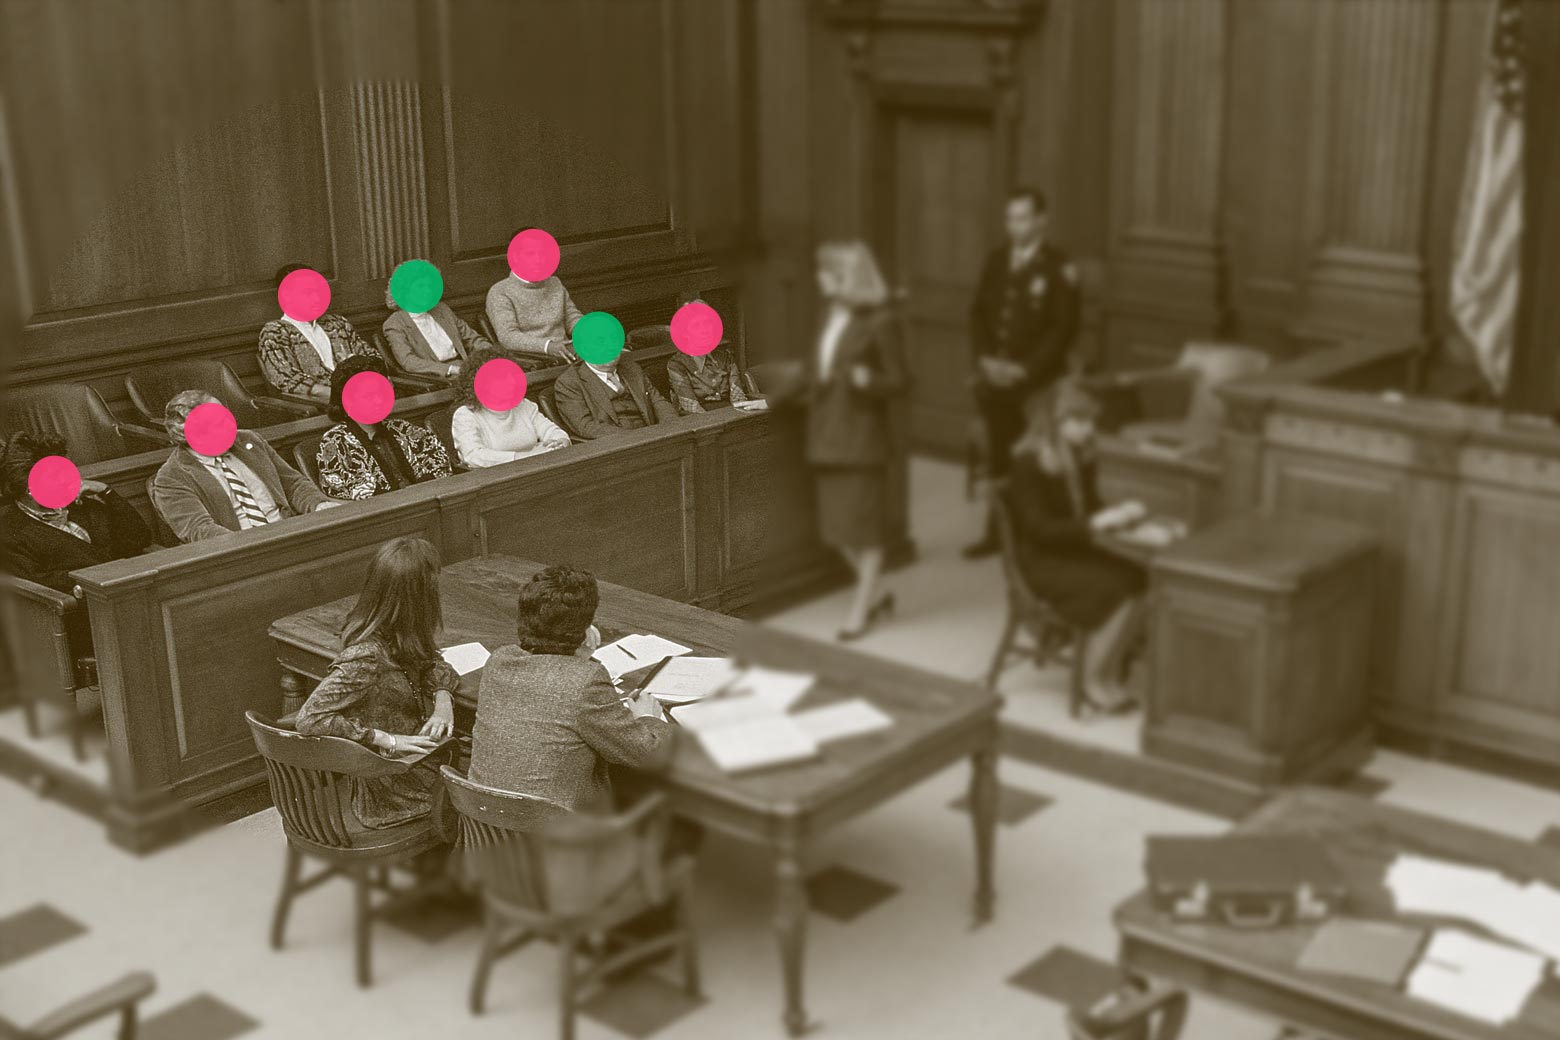 An overhead view of a courtroom in session is seen, with the jury members' faces cut out. Two people sit on a table while a woman talks to the jury. A person stands behind her and near another woman at a desk.